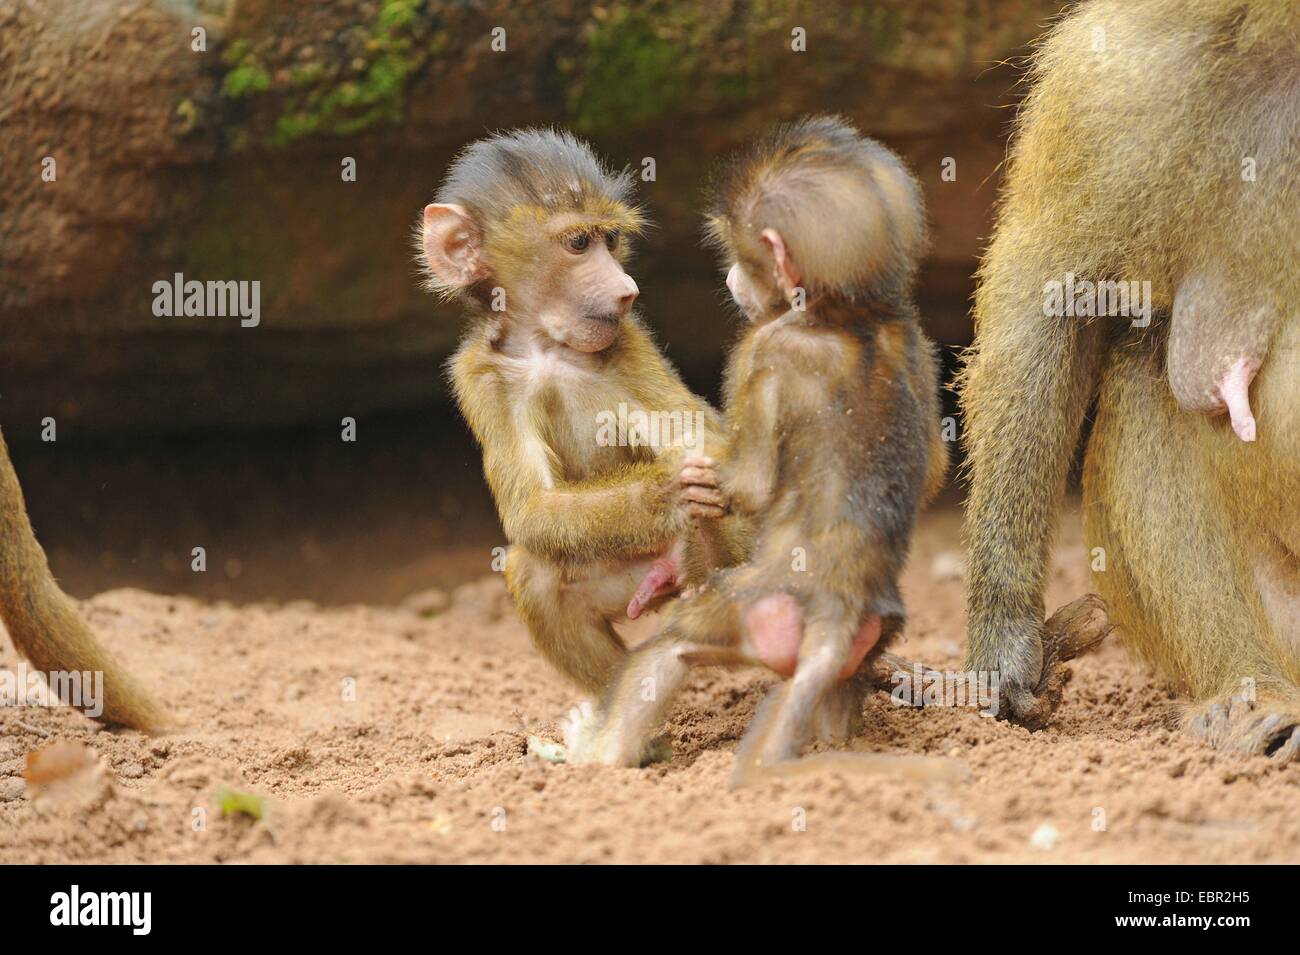 Guinean baboon, Western baboon (Papio papio), two littly monkeys eying up one another Stock Photo